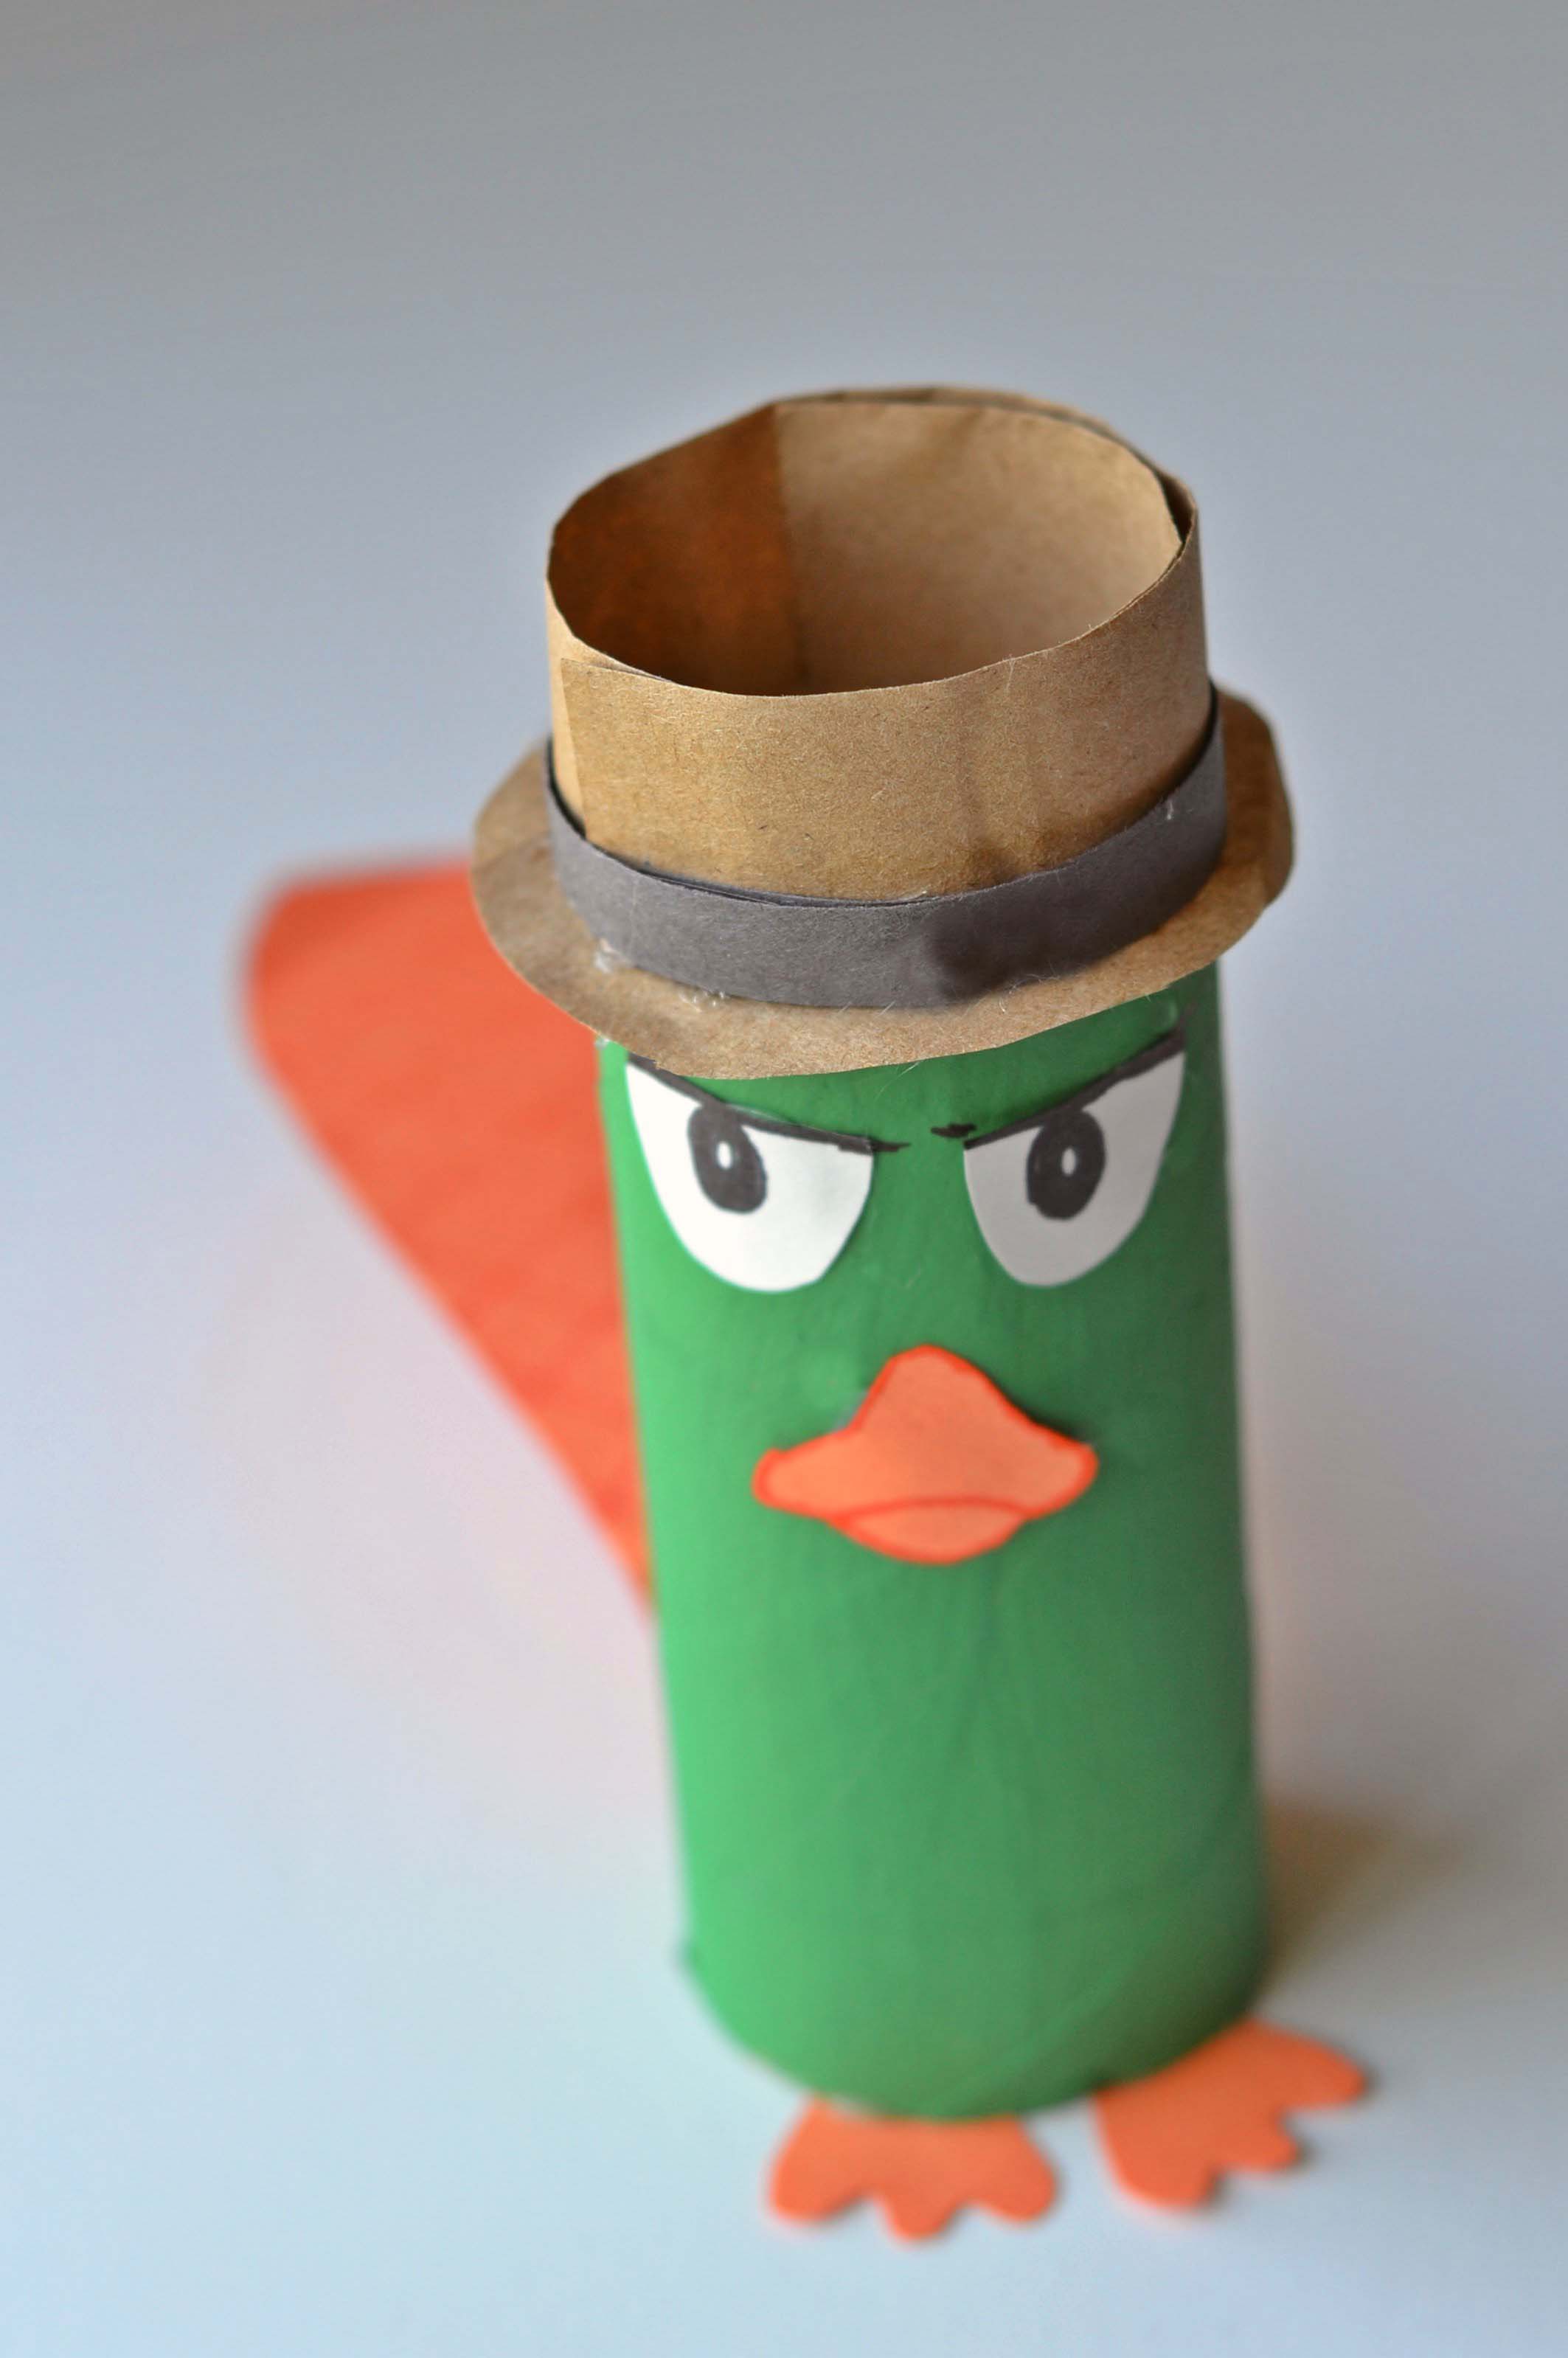 Perry the Platypus Agent P Kids Craft - This fun toilet paper tube craft is perfect for Phineas and Ferb fans!